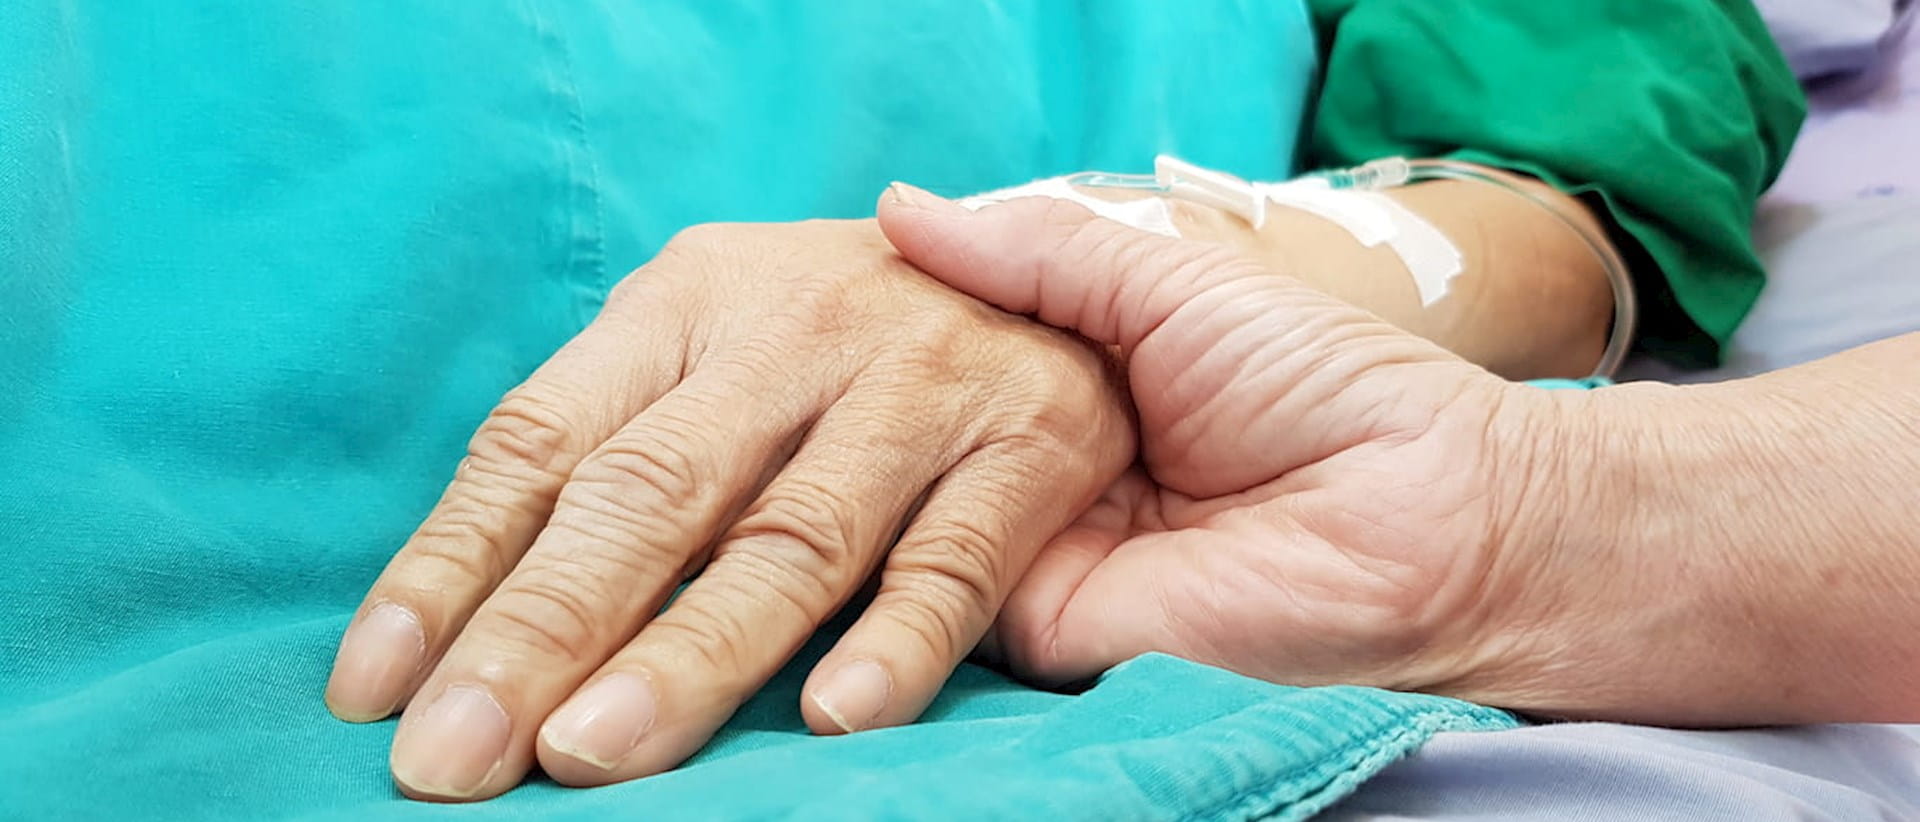 Holding patient's hand